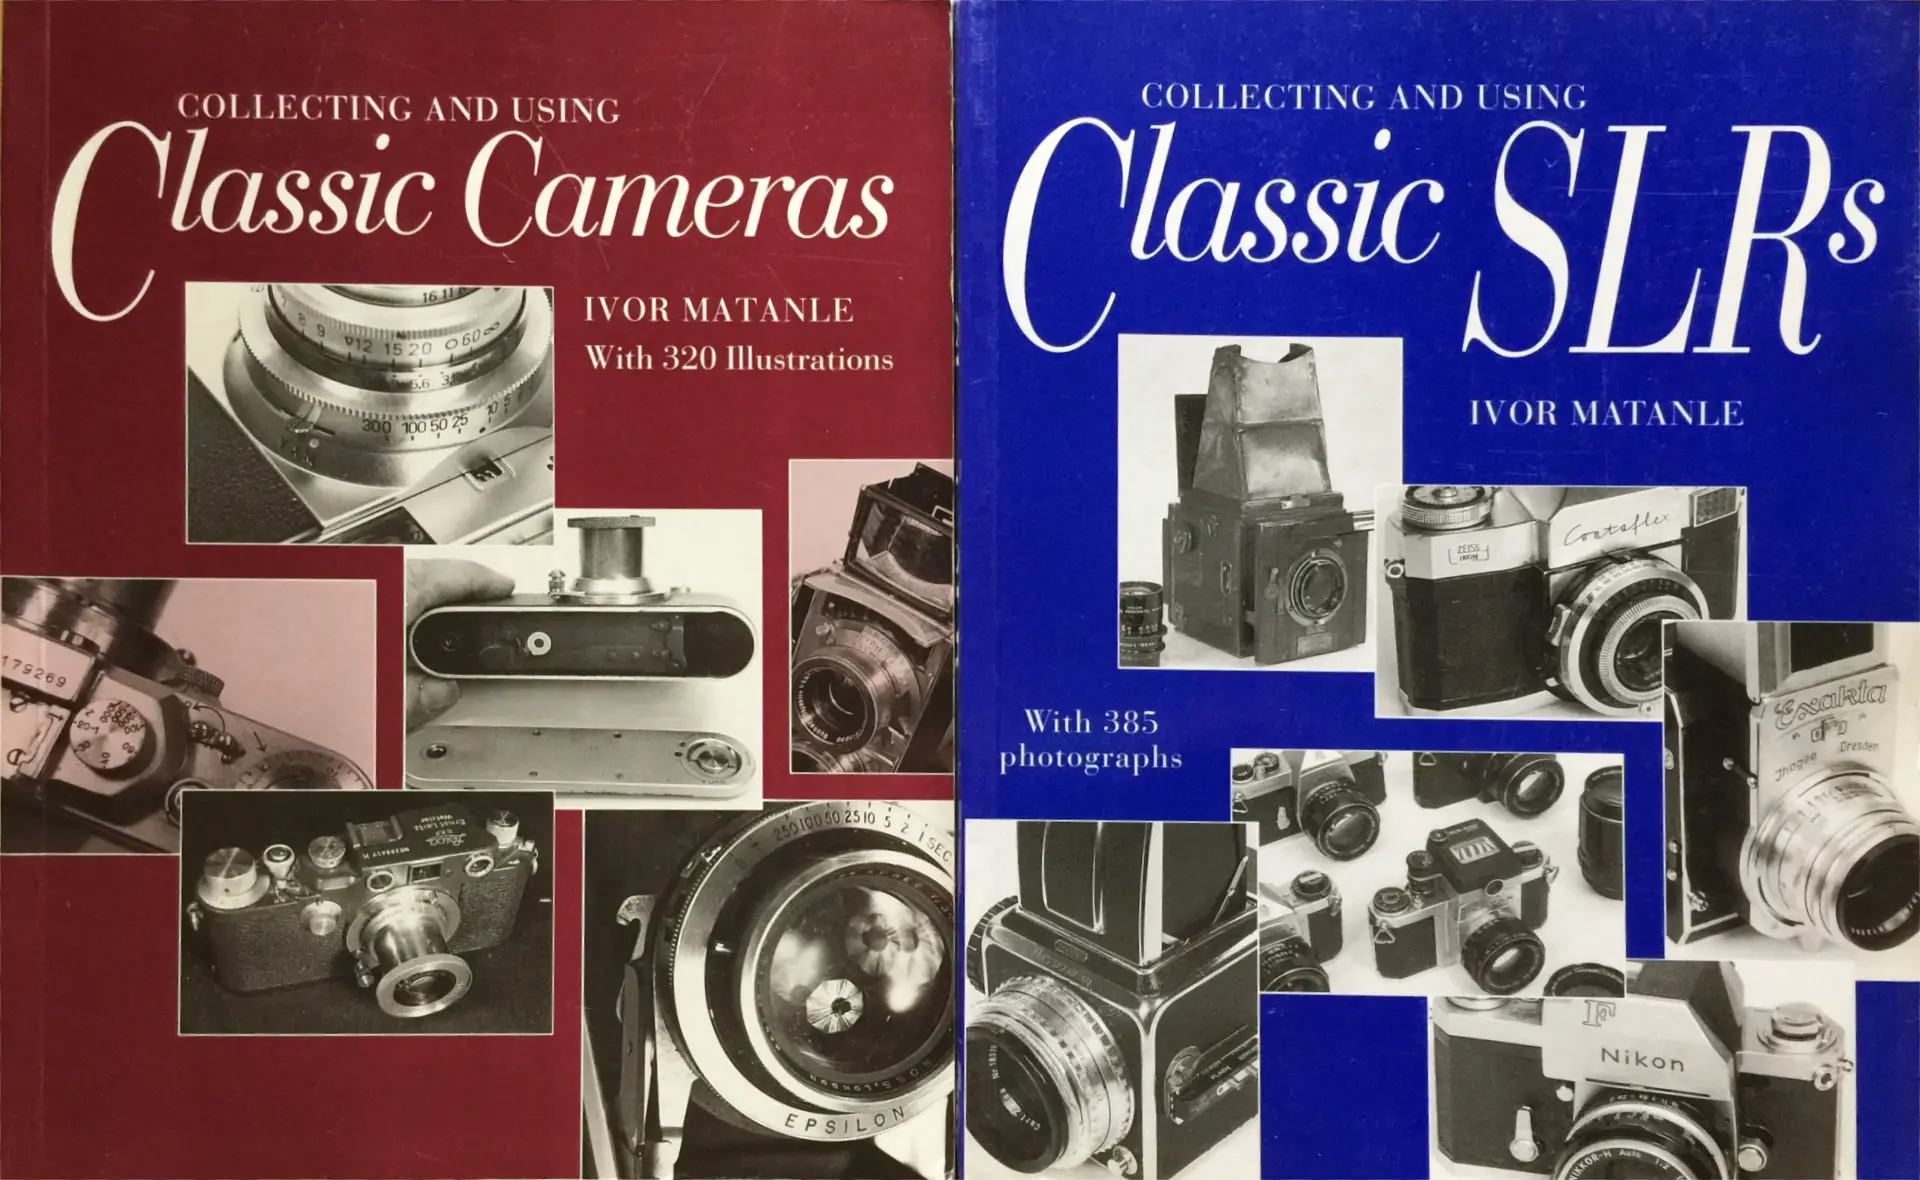 Matanle collecting and using classic camera books